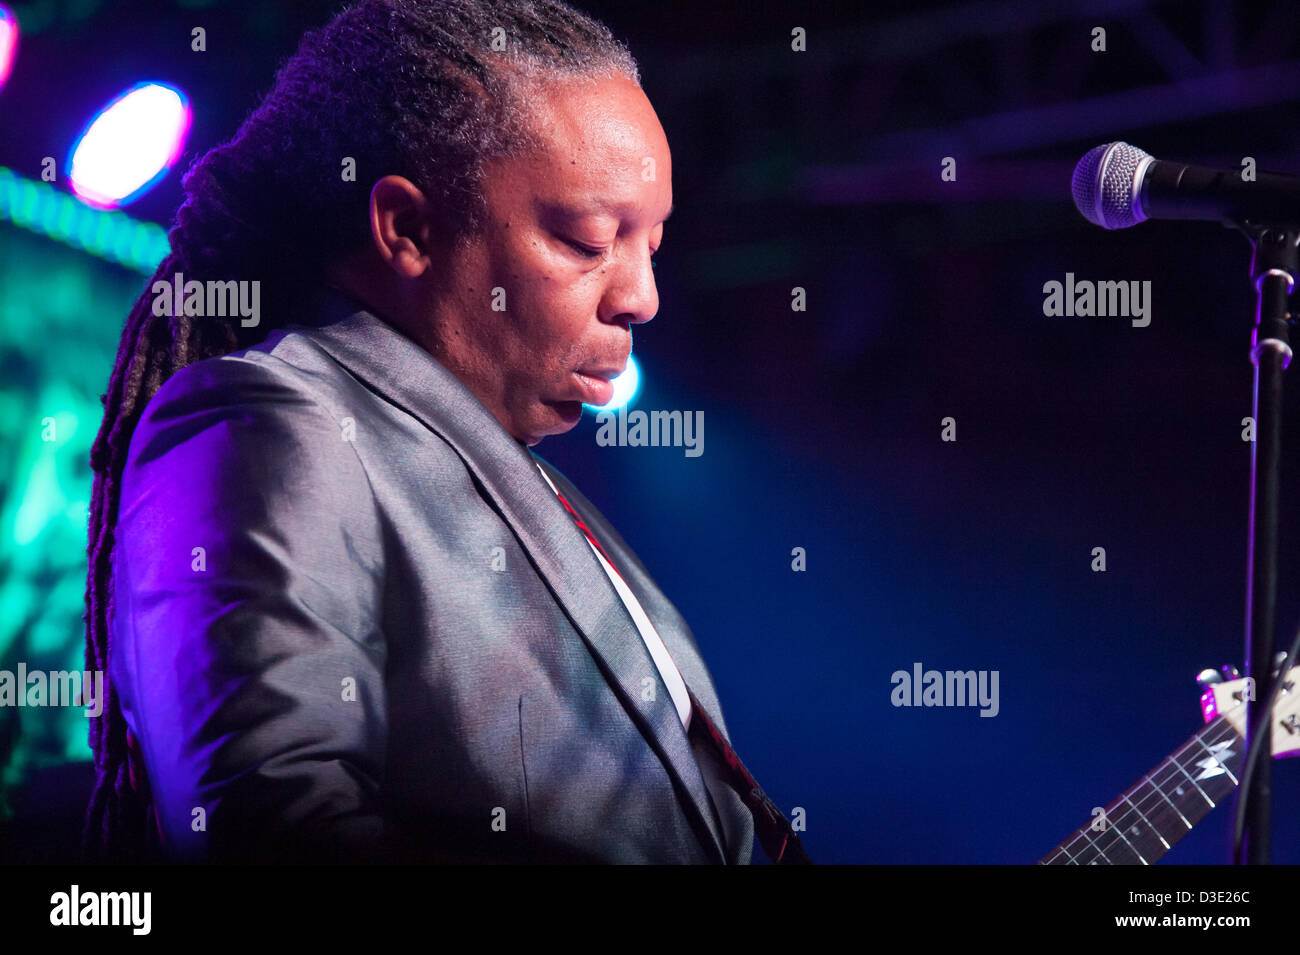 LINCOLN, CA - February 15: The Bar-Kays perform at V101's Valentines bash featuring The Club Nouveau and ZAPP at Thunder Valley Casino Resort in Lincoln, California on February 2, 2013 Stock Photo